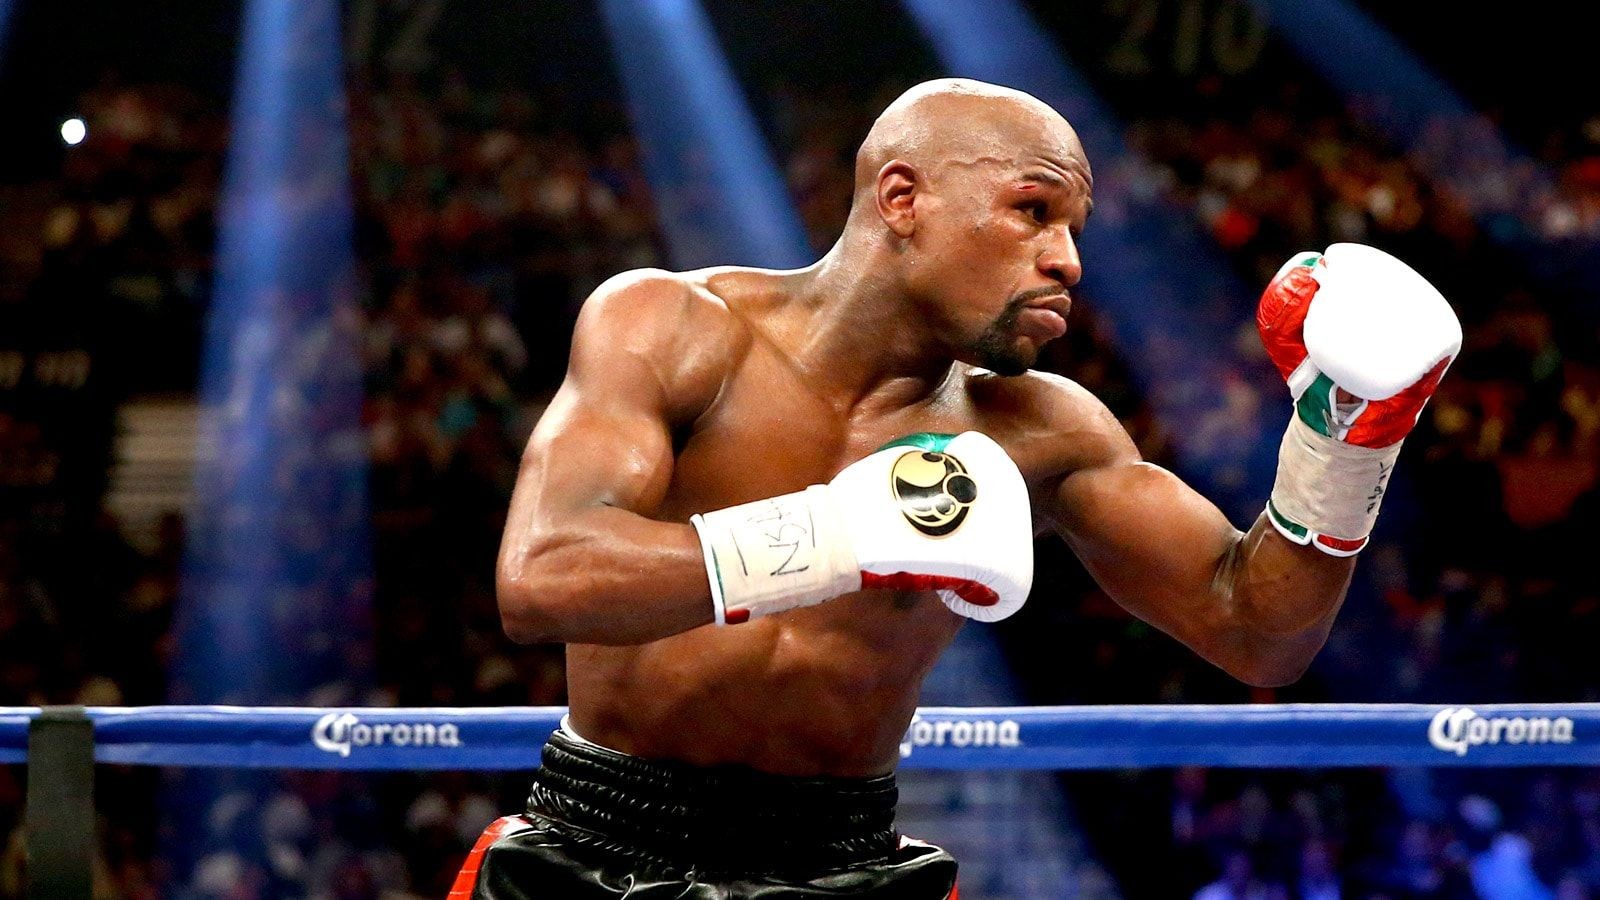 Floyd Mayweather during a match.